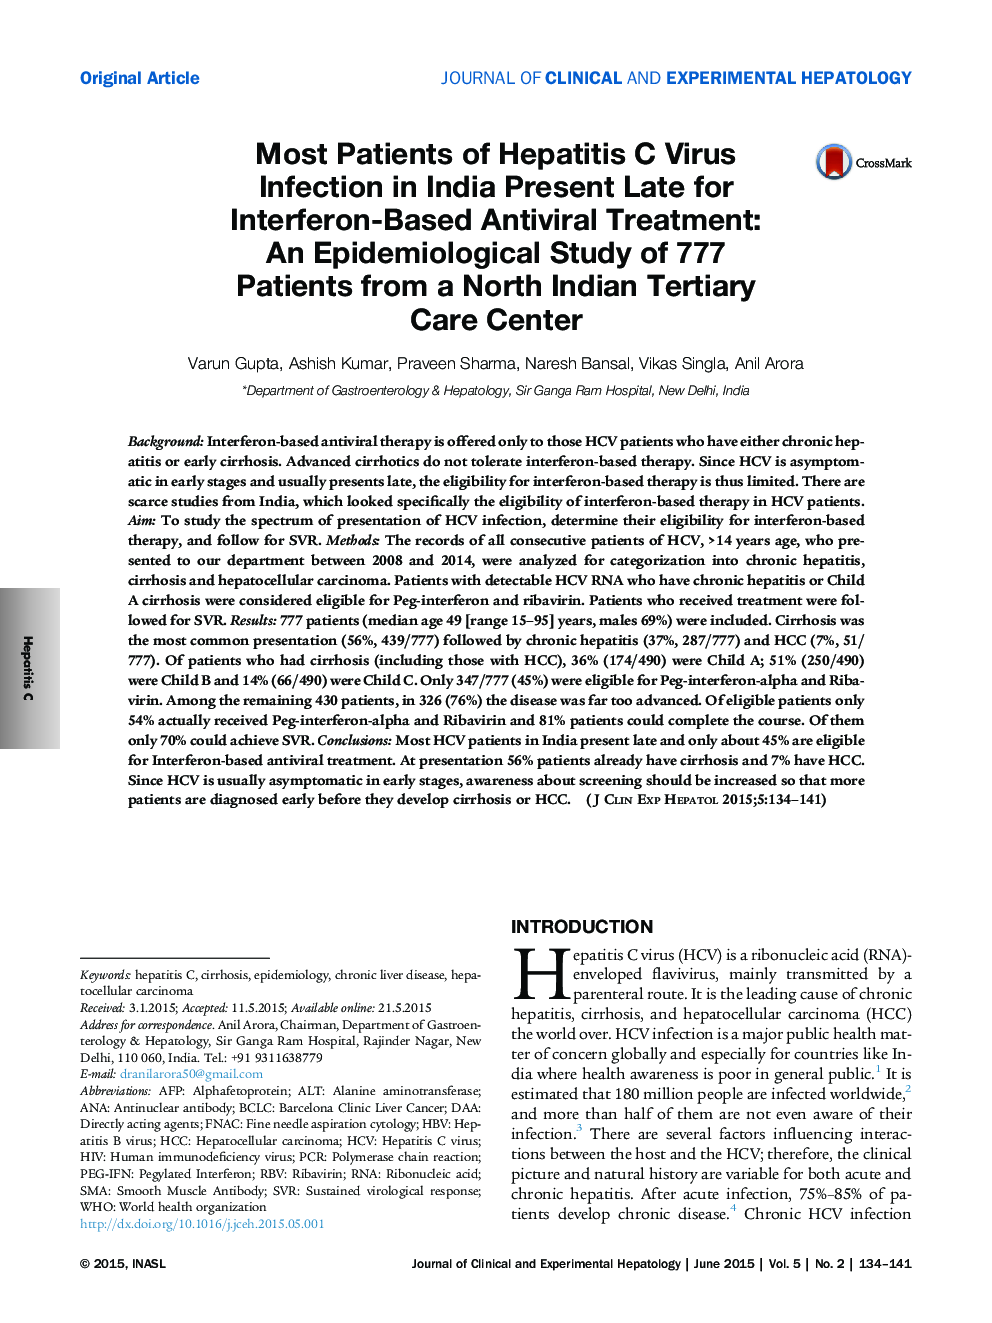 Most Patients of Hepatitis C Virus Infection in India Present Late for Interferon-Based Antiviral Treatment: An Epidemiological Study of 777 Patients from a North Indian Tertiary Care Center